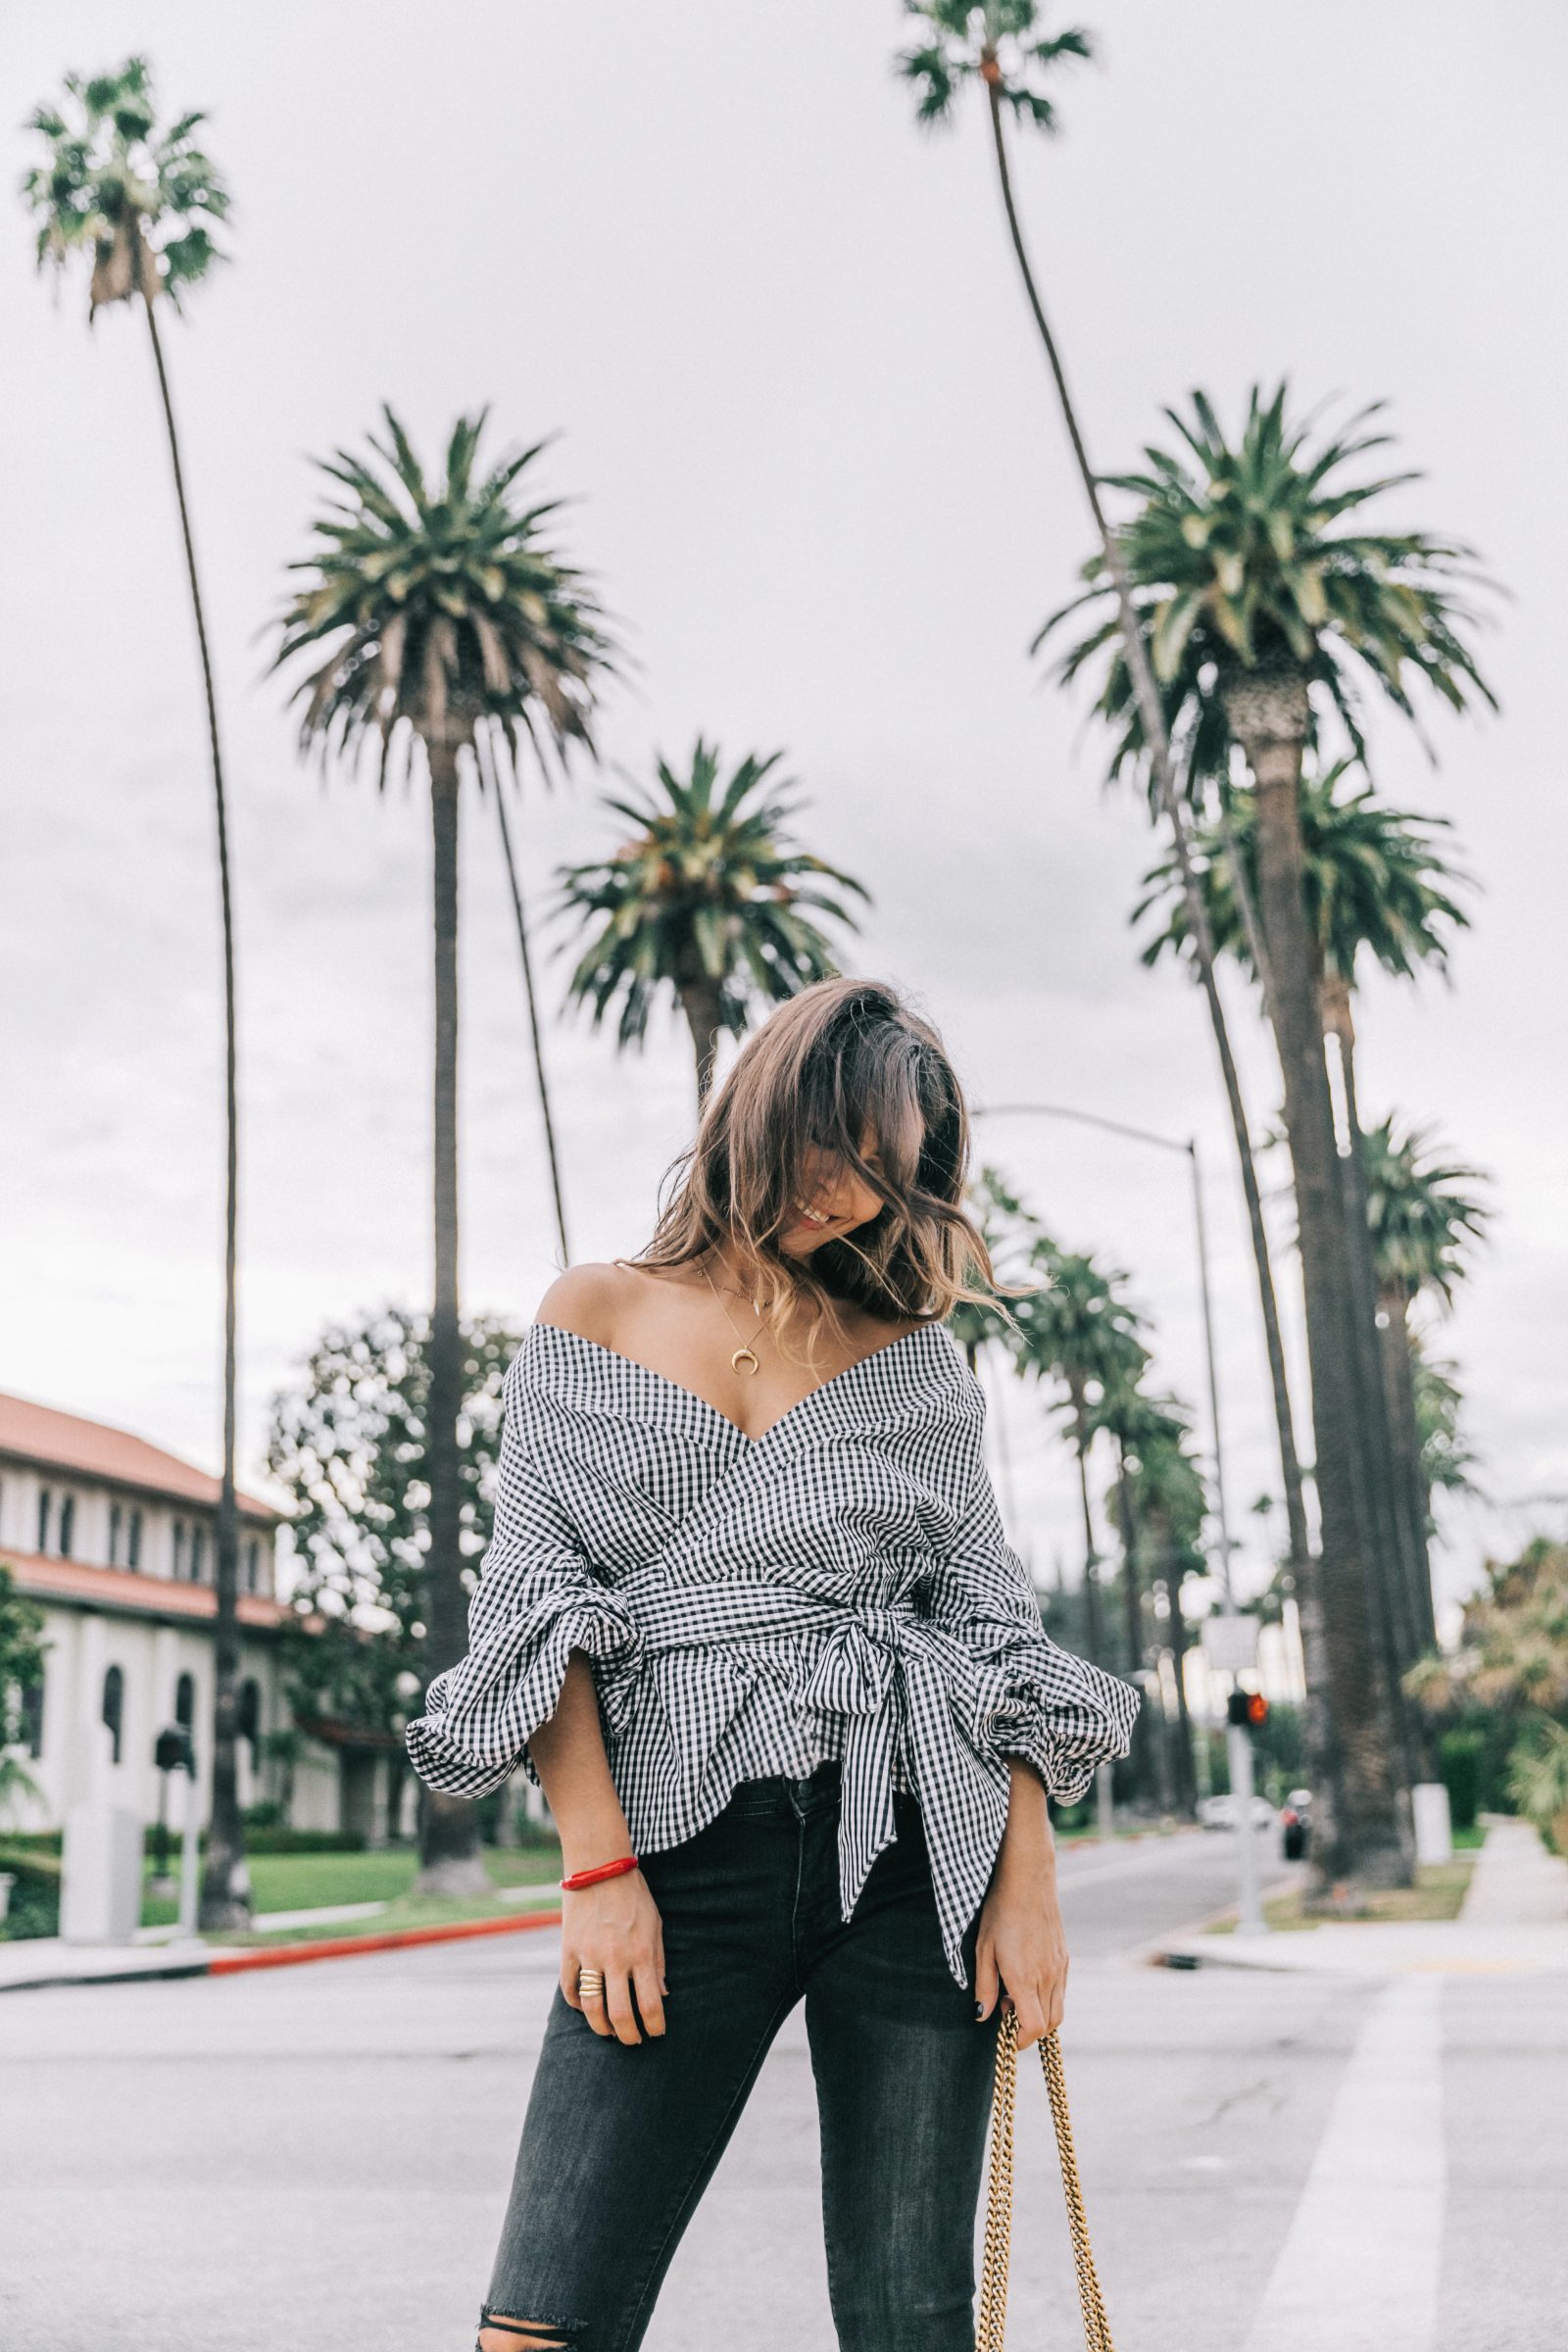 beverly_hills-off_the_shoulders_shirt-plaid-skinny_jeans-ripped_jeans-sincerely_jules_shop-gucci_bag-chicwish-outfit-street_style-los_angeles-collage_vintage-36